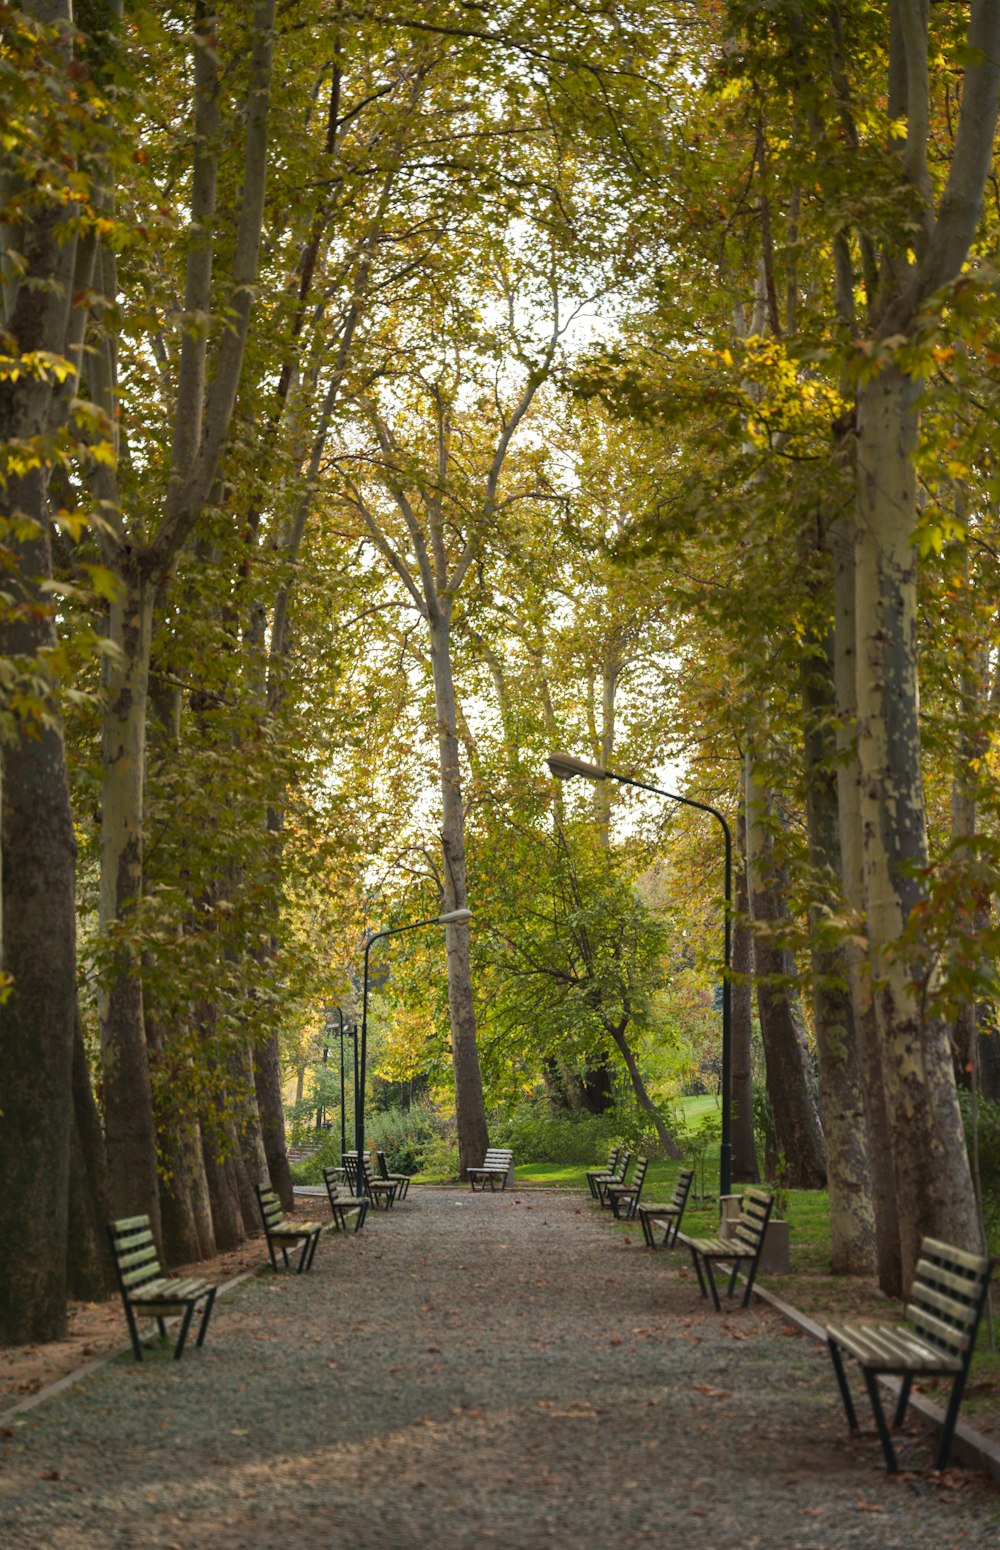 a pathway in a park lined with trees and benches